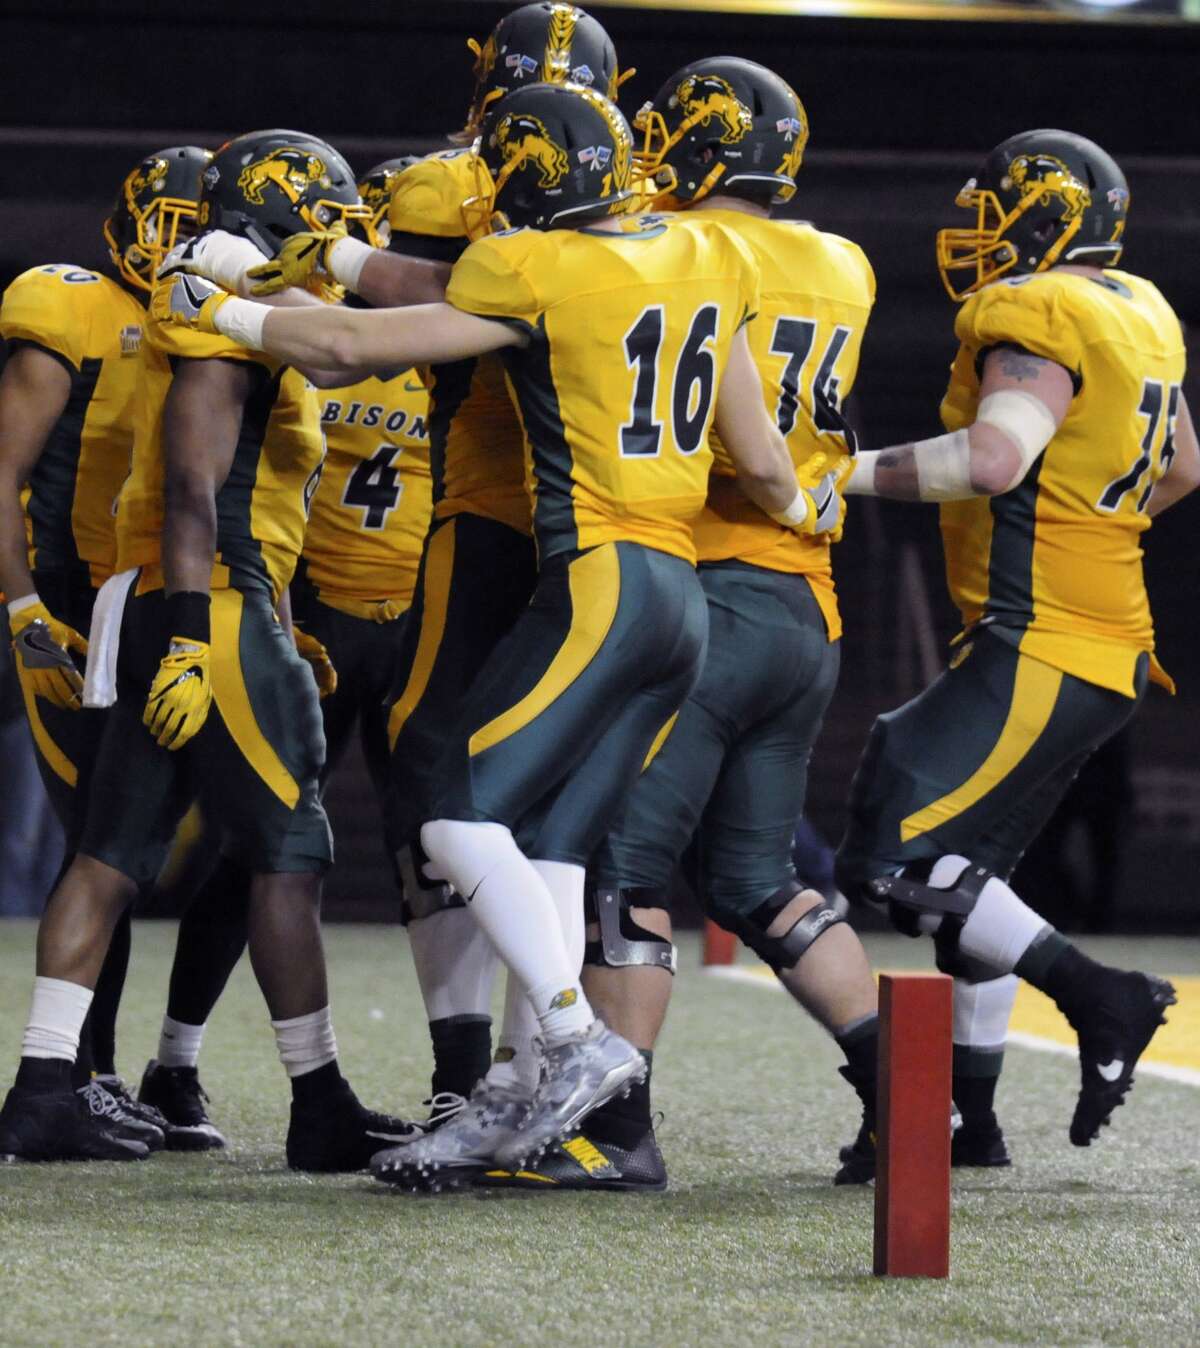 North Dakota State players celebrate after running back Bruce Anderson scored a touchdown during an NCAA college football game against Sam Houston State, Friday, Dec. 15, 2017 in Fargo, N.D. North Dakota State took back the Football Championship Subdivision title, beating James Madison 17-13 on Saturday. (Gene Schallenberg/The Huntsville Item via AP)